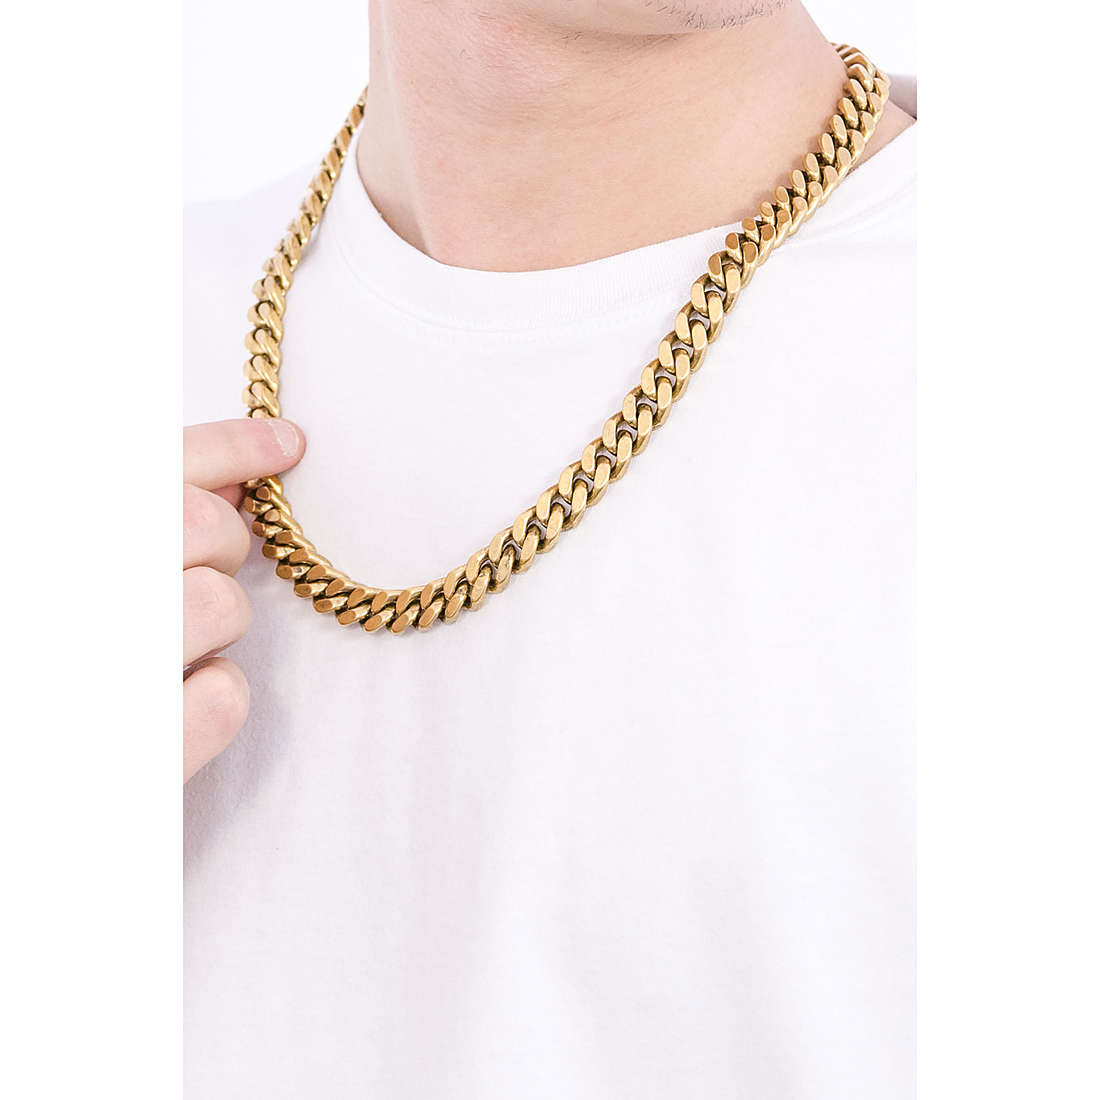 Guess necklaces Hype man JUMN70015JW wearing